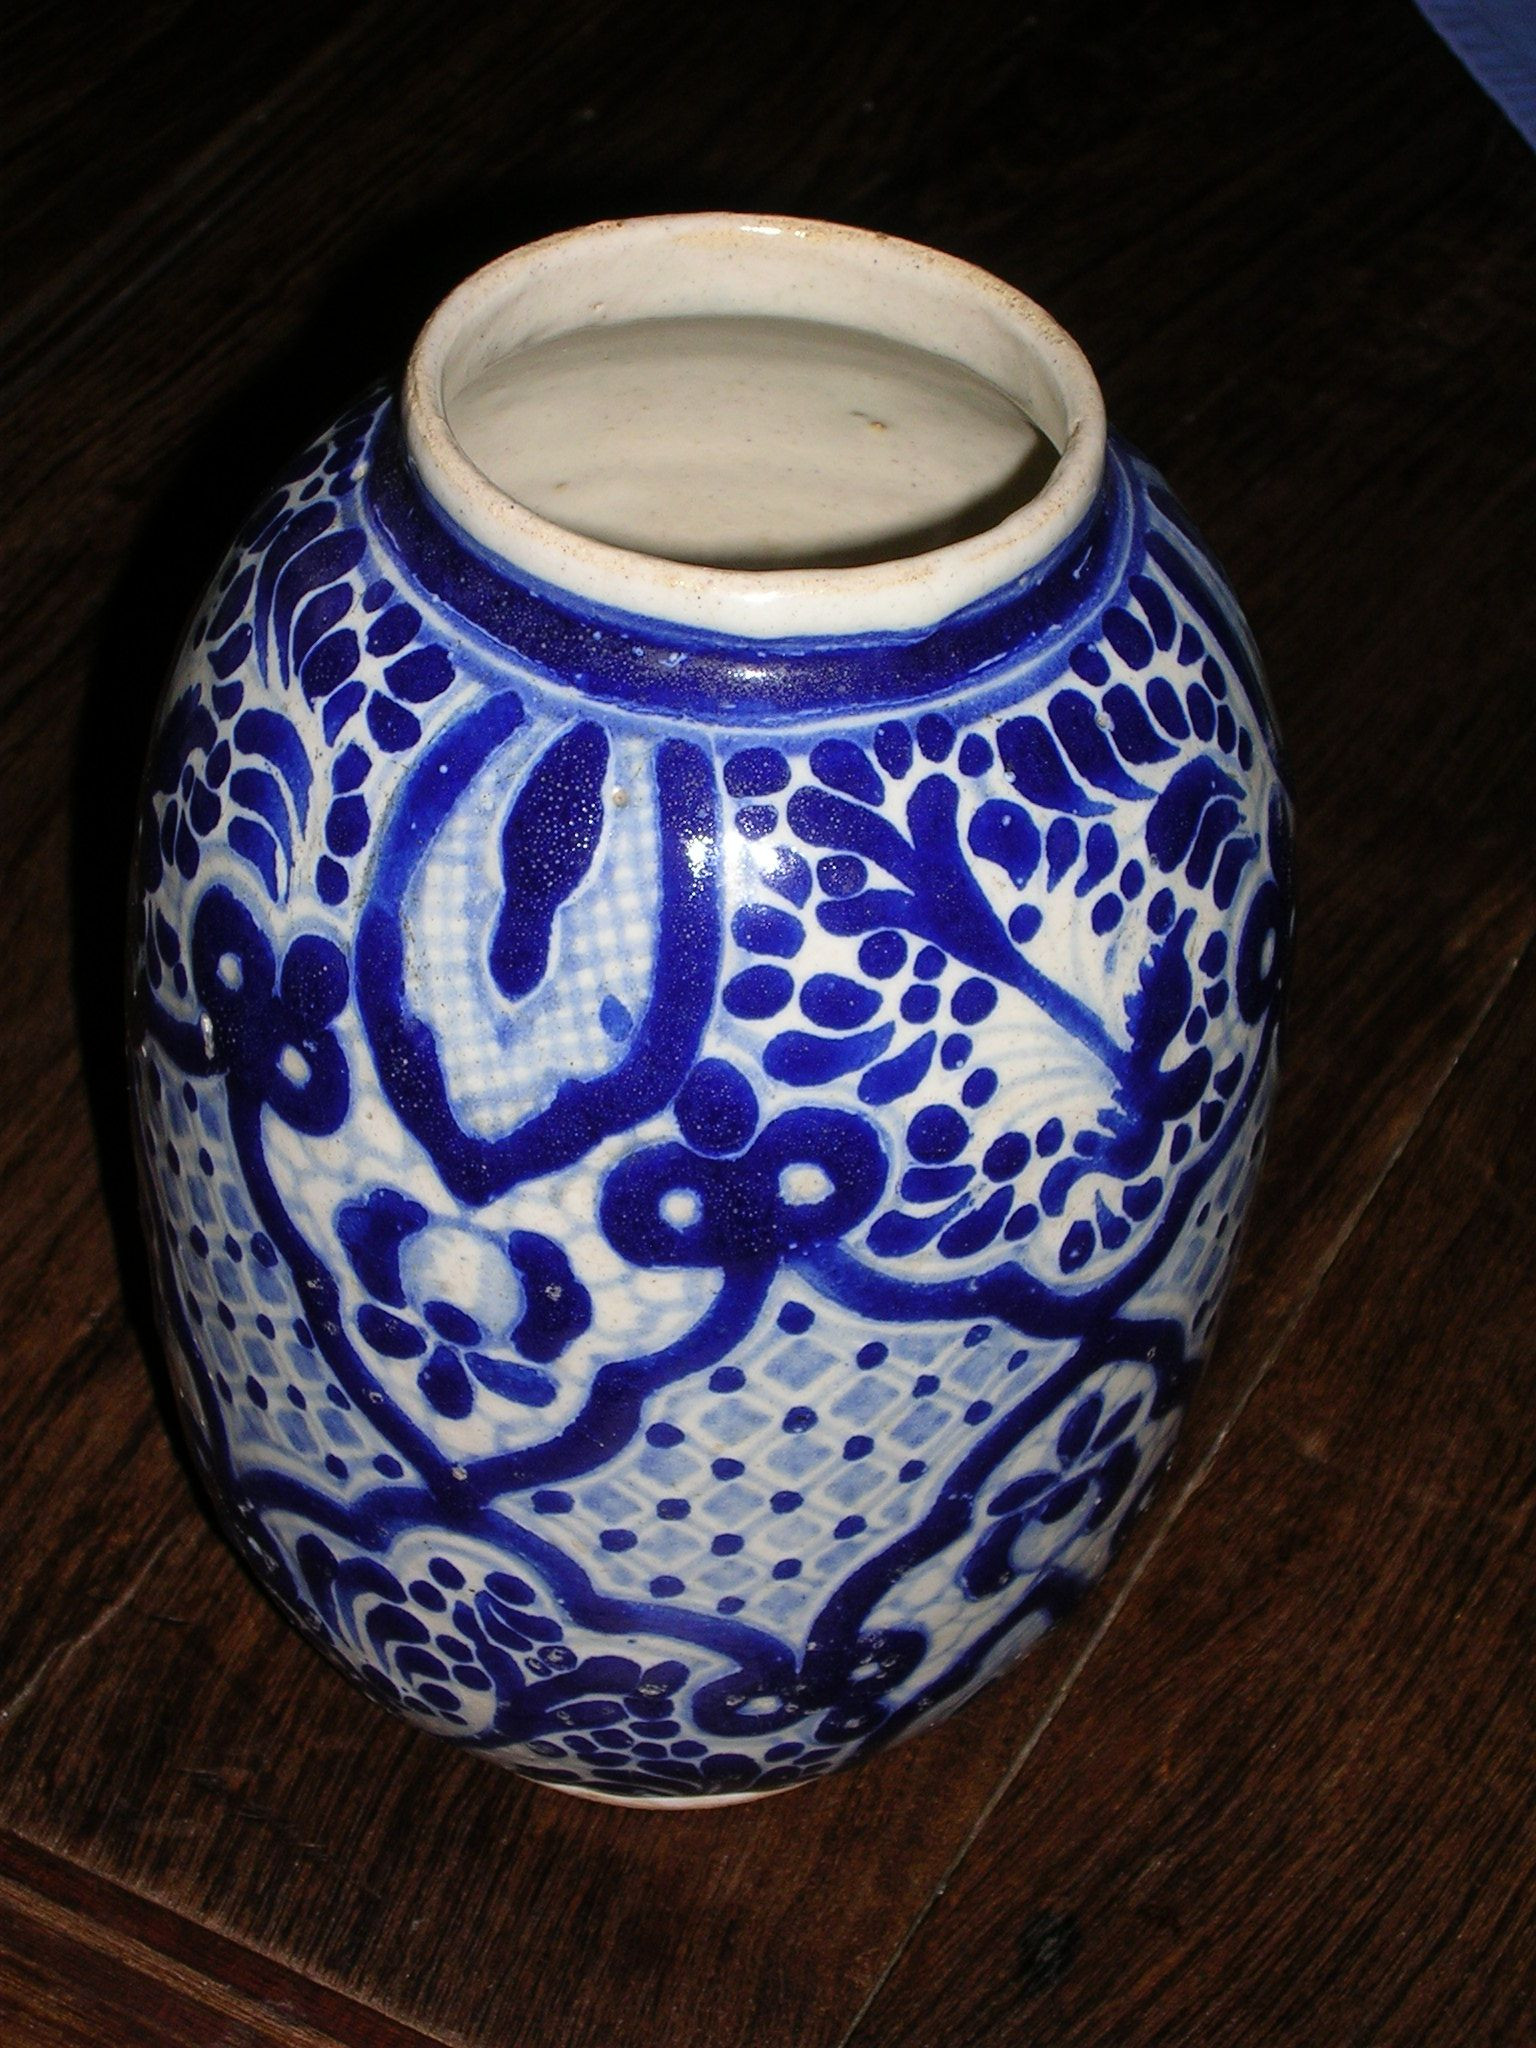 16 Unique Mexican Talavera Vases 2024 free download mexican talavera vases of vintage enamelware bowl bold graphic design within our uriarte talavera see more at www mainlymexican com mexico mexican